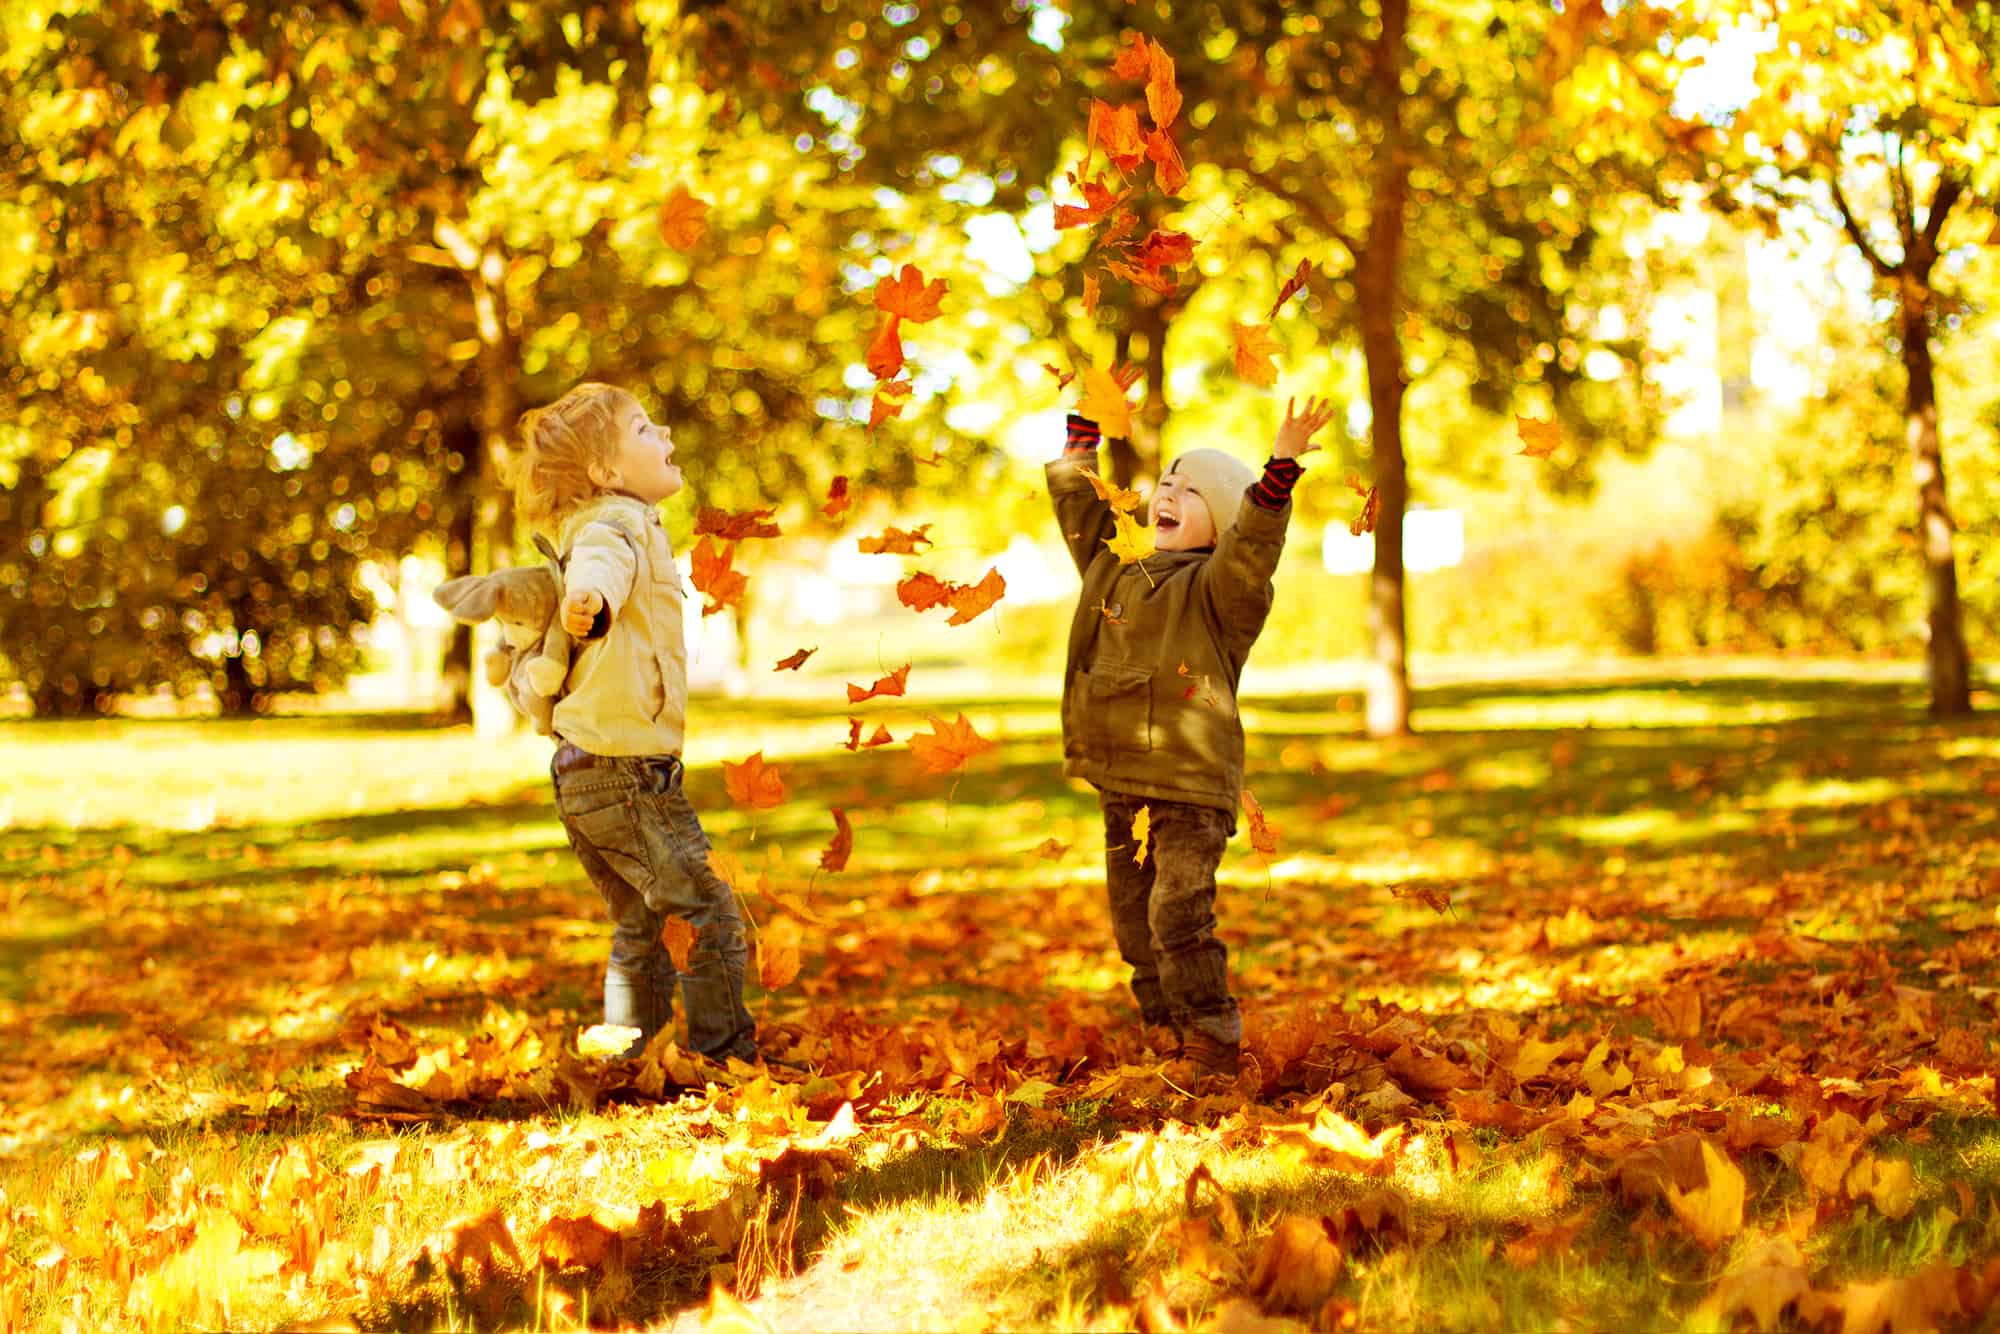 Fun Fall Family Activities begin with jumping in leaf piles! Get our list of 22 awesome family activities at Made in a Pinch. For more great tips and recipes, follow us on Pinterest!